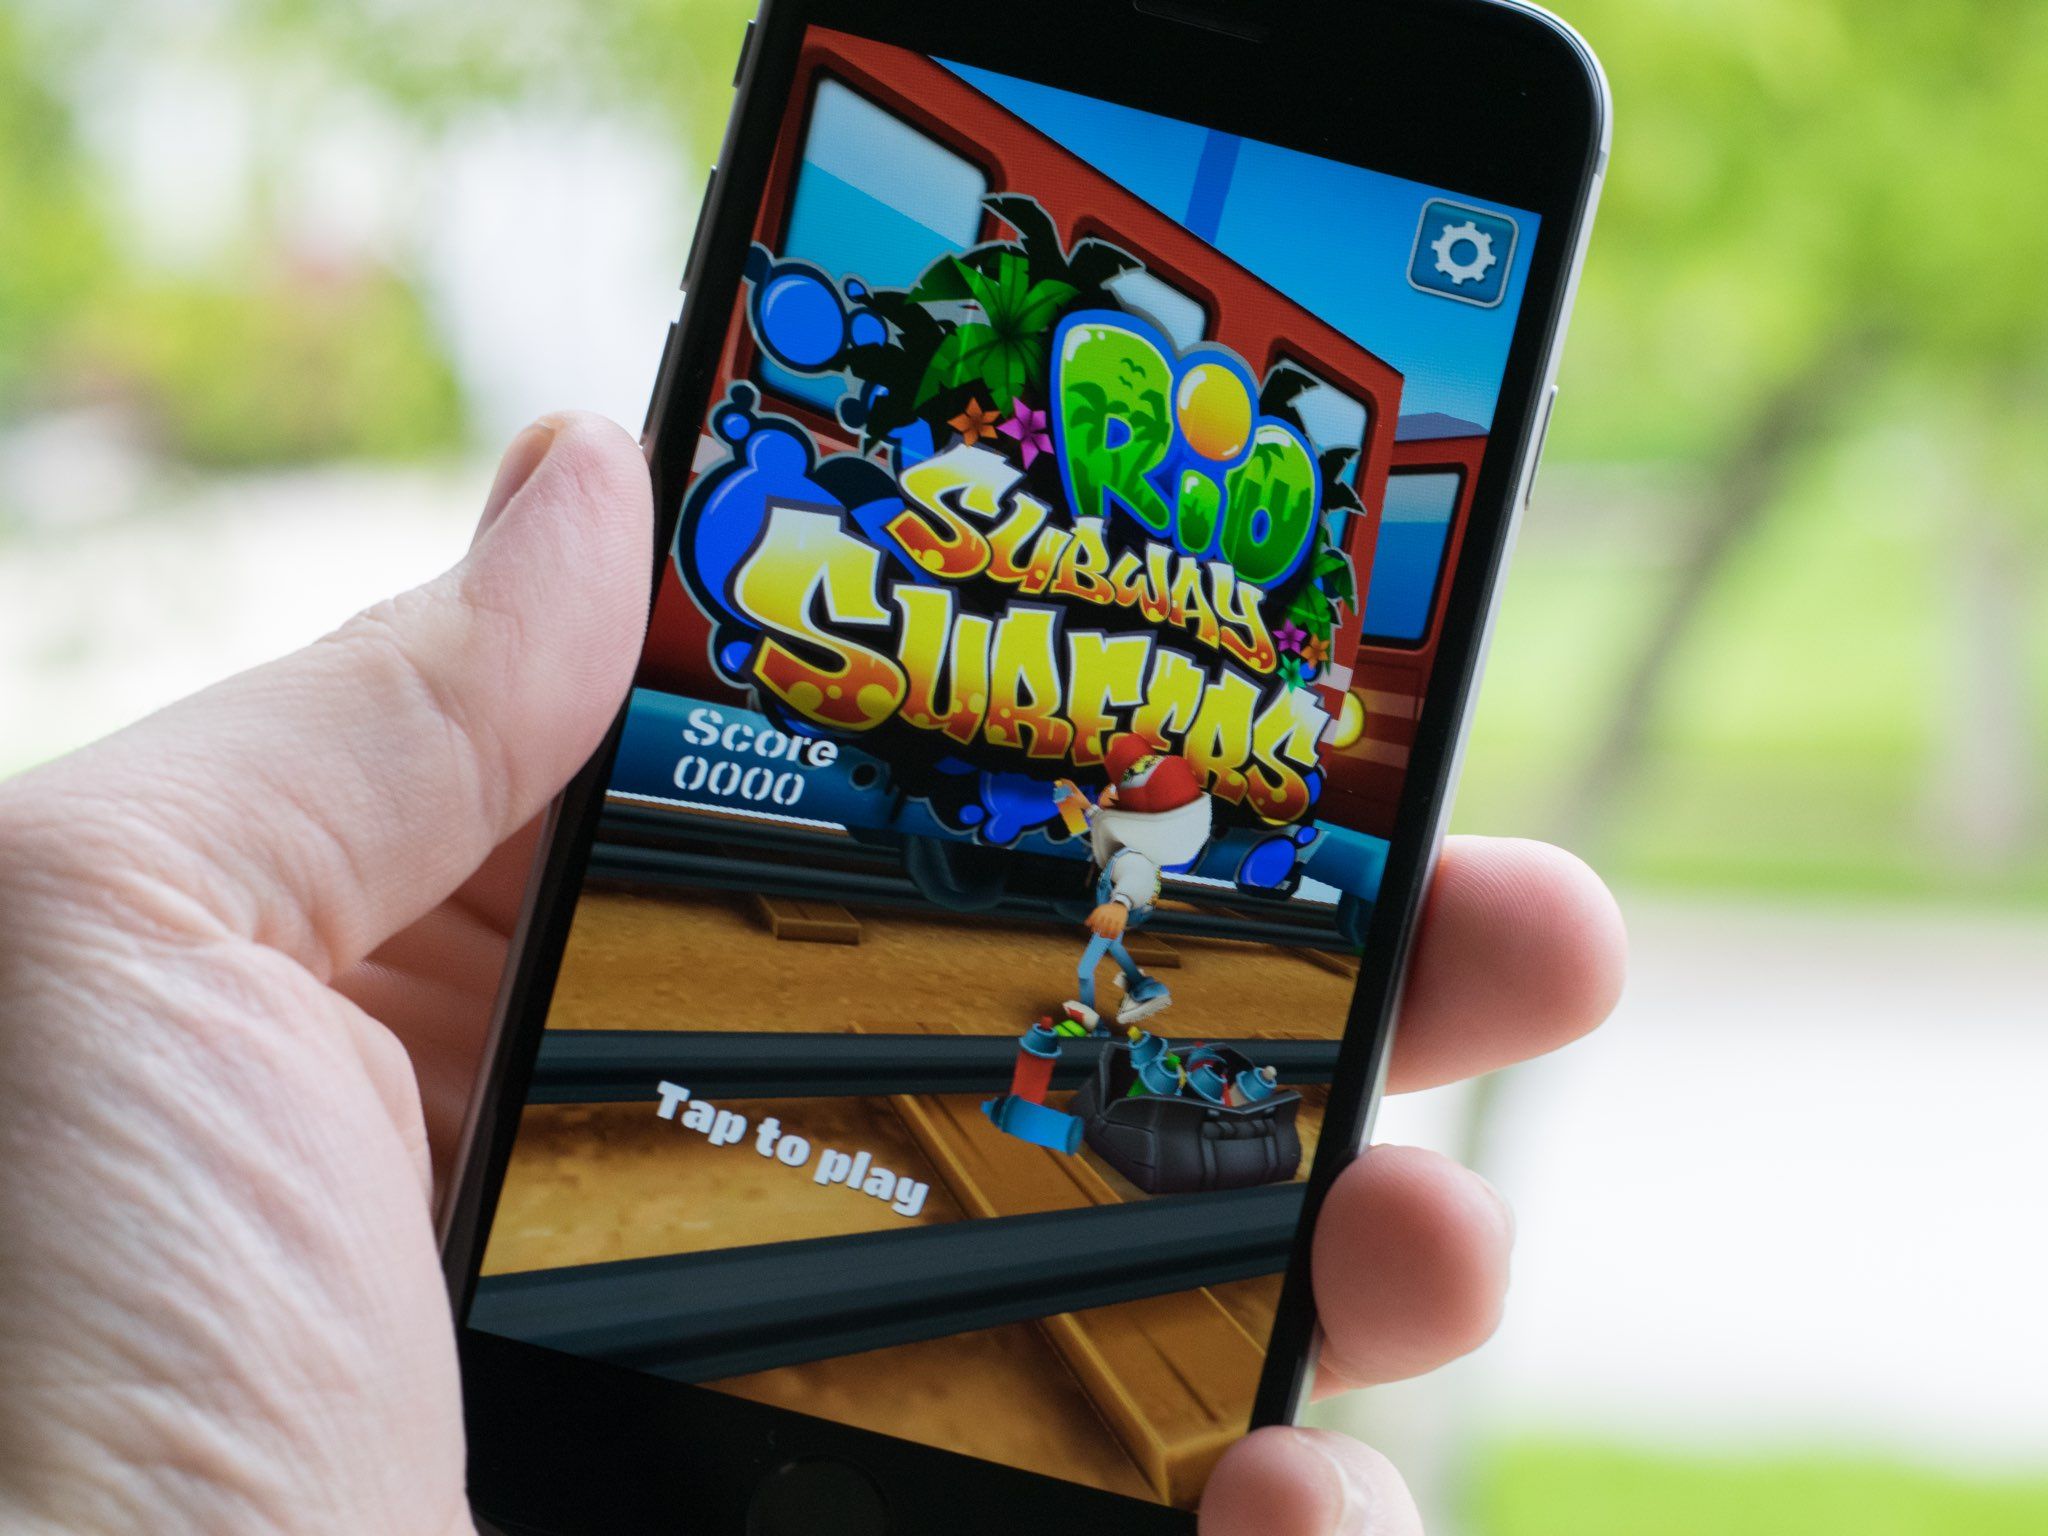 Subway Surfers for Windows Phone, Android and iOS Adds World Tour